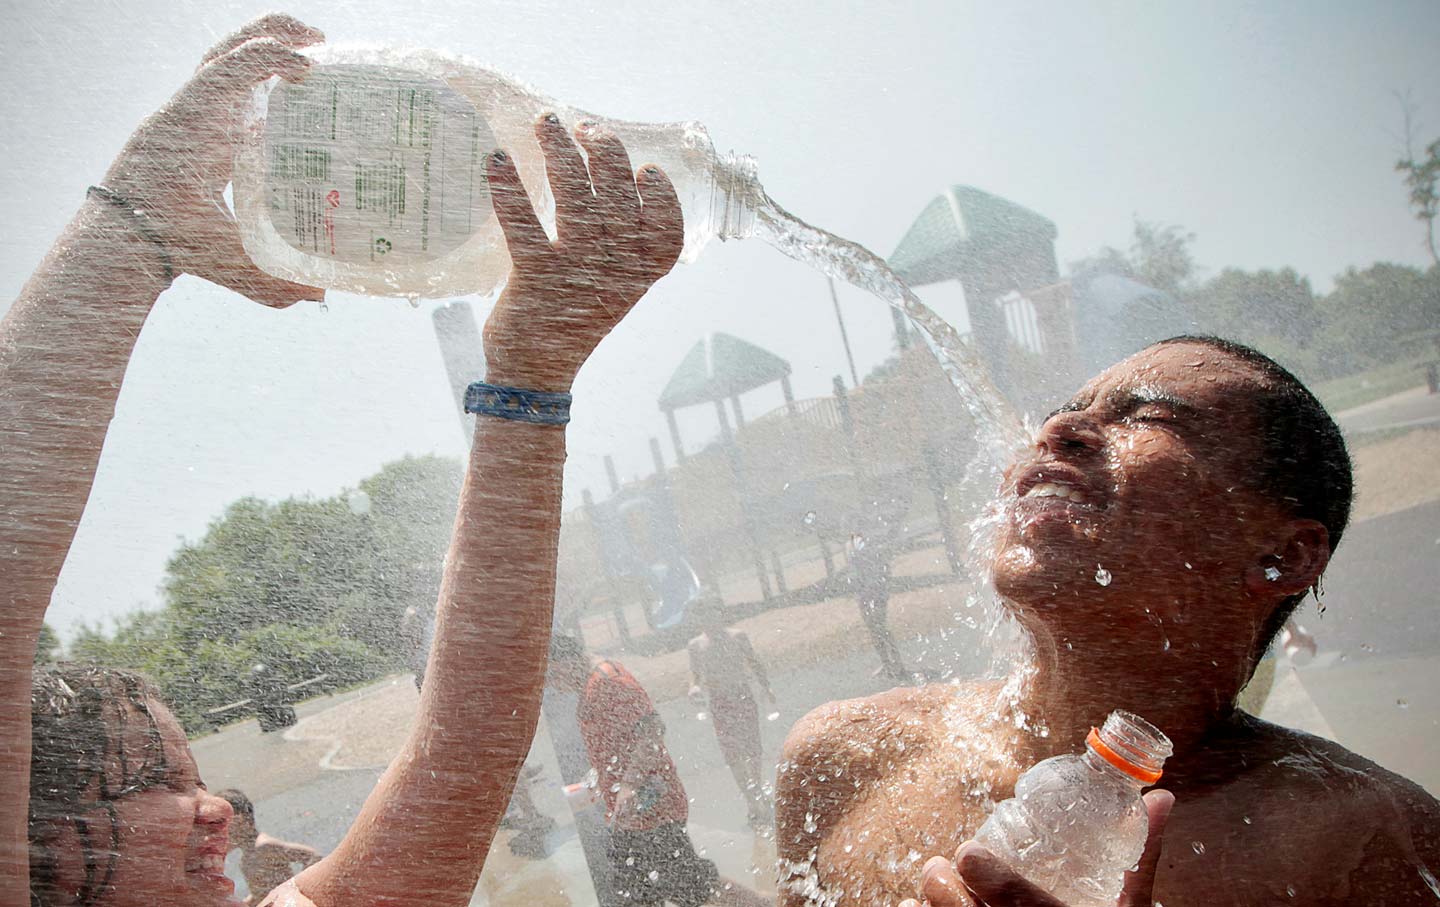 Paige Avila cools off her brother Eric Avila in Massachusetts in a 2012 heat wave.